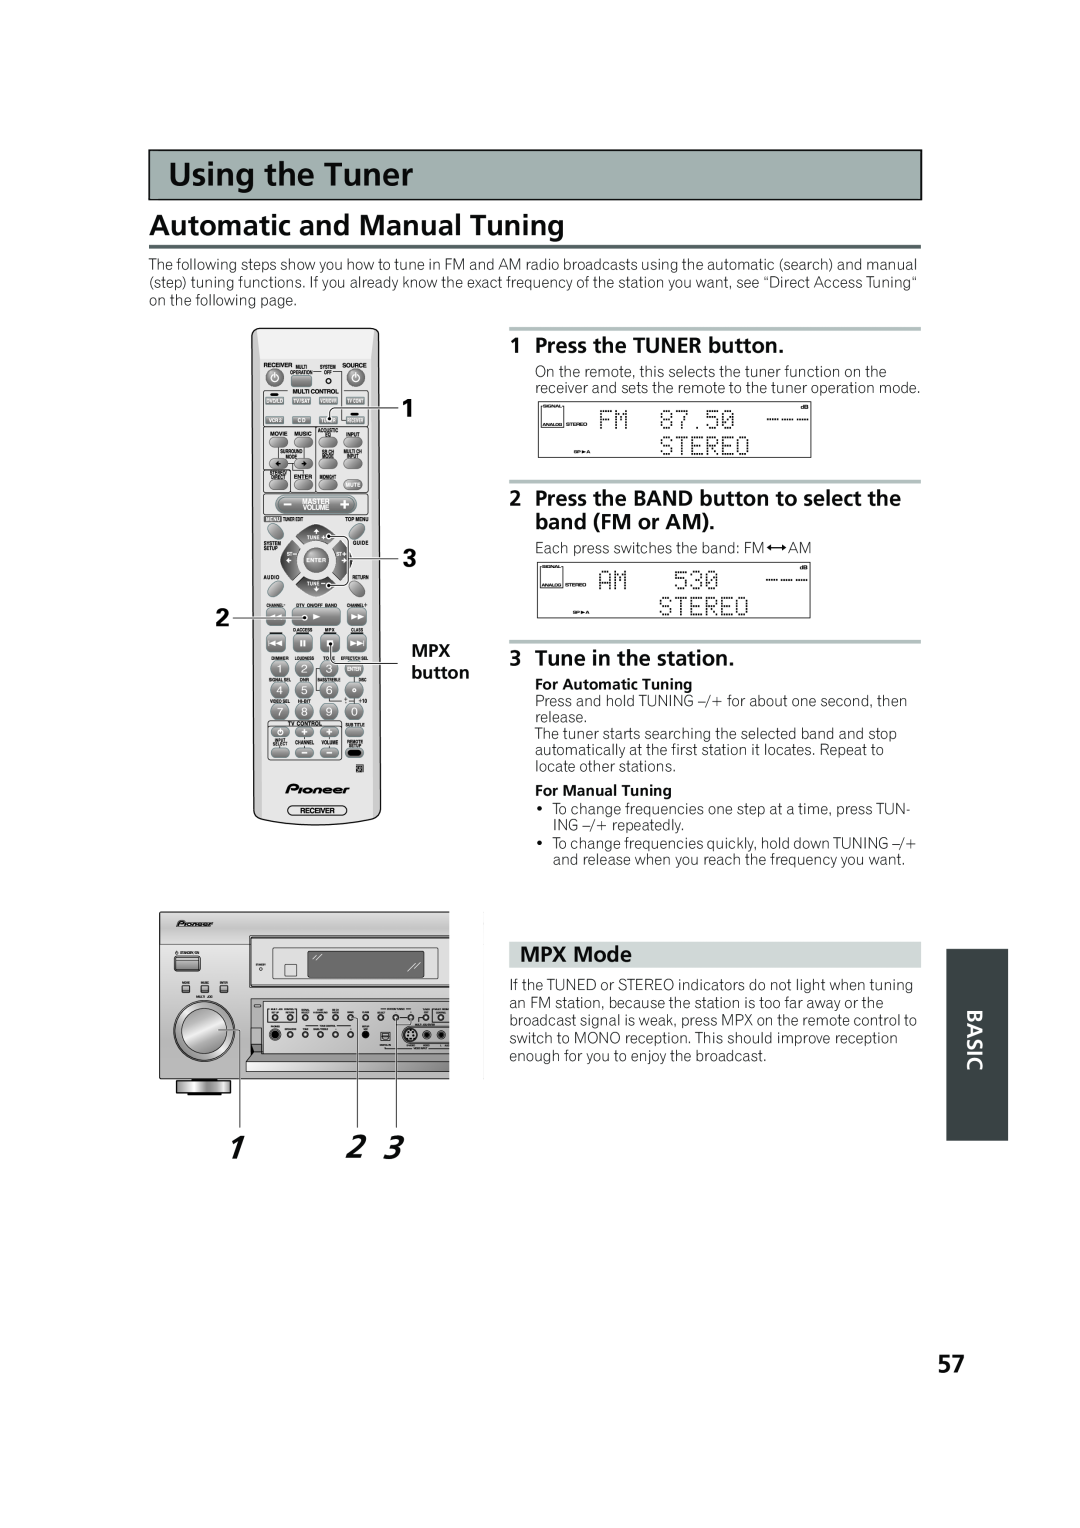 Pioneer VSX-53TX Using the TunerUsing the Tuner, Automatic and Manual Tuning, Press the BAND button to select the, Basic 